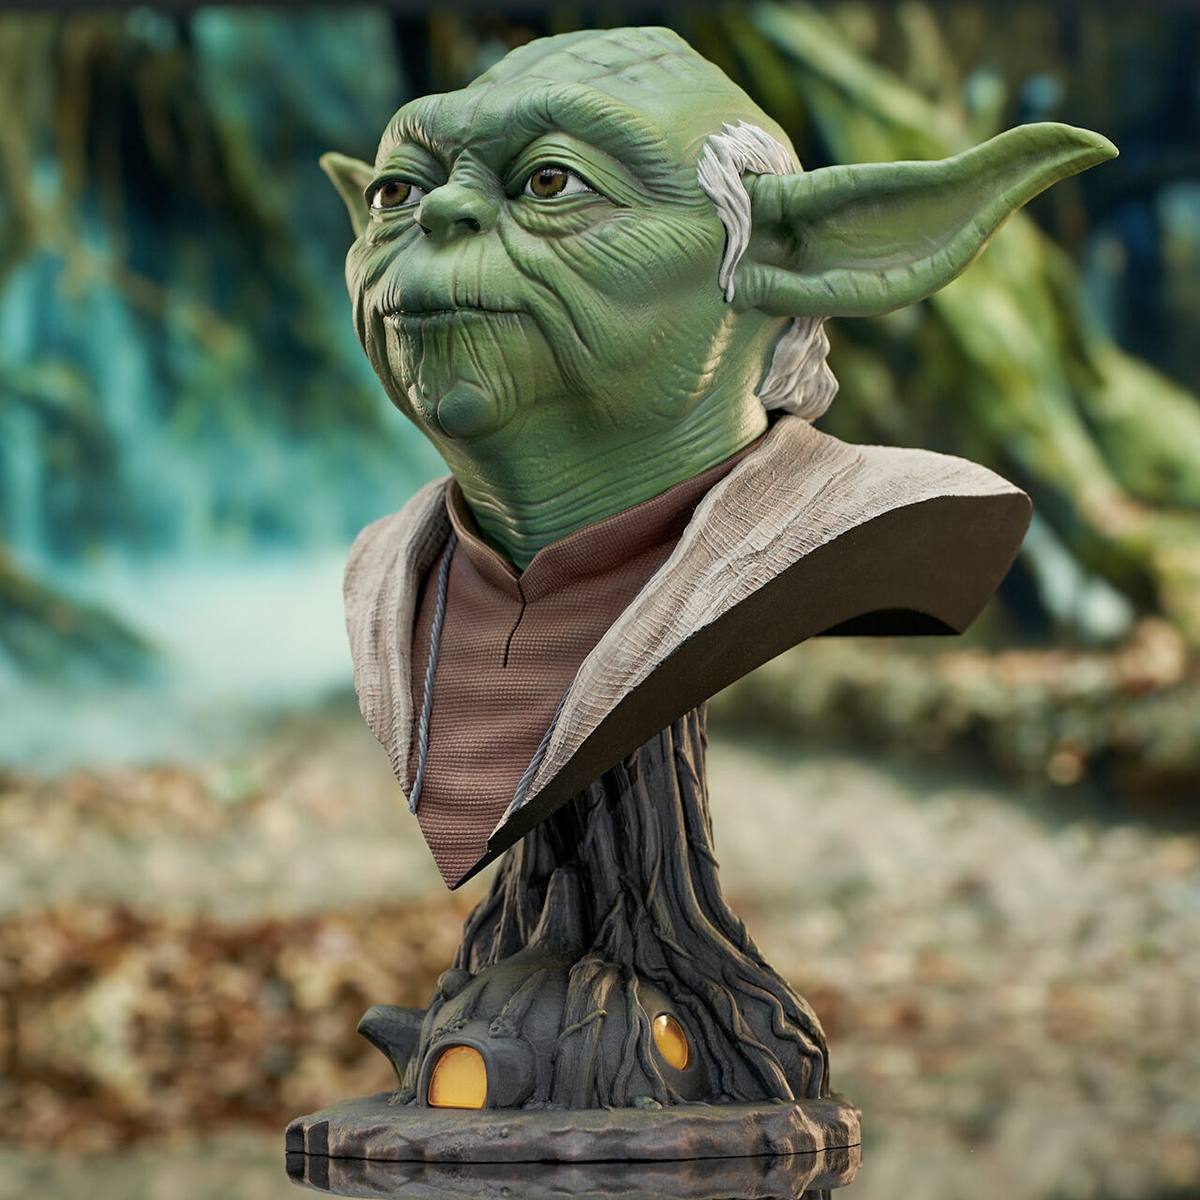 Yoda Legends in 3D Star Wars: The Empire Strikes Back Bust